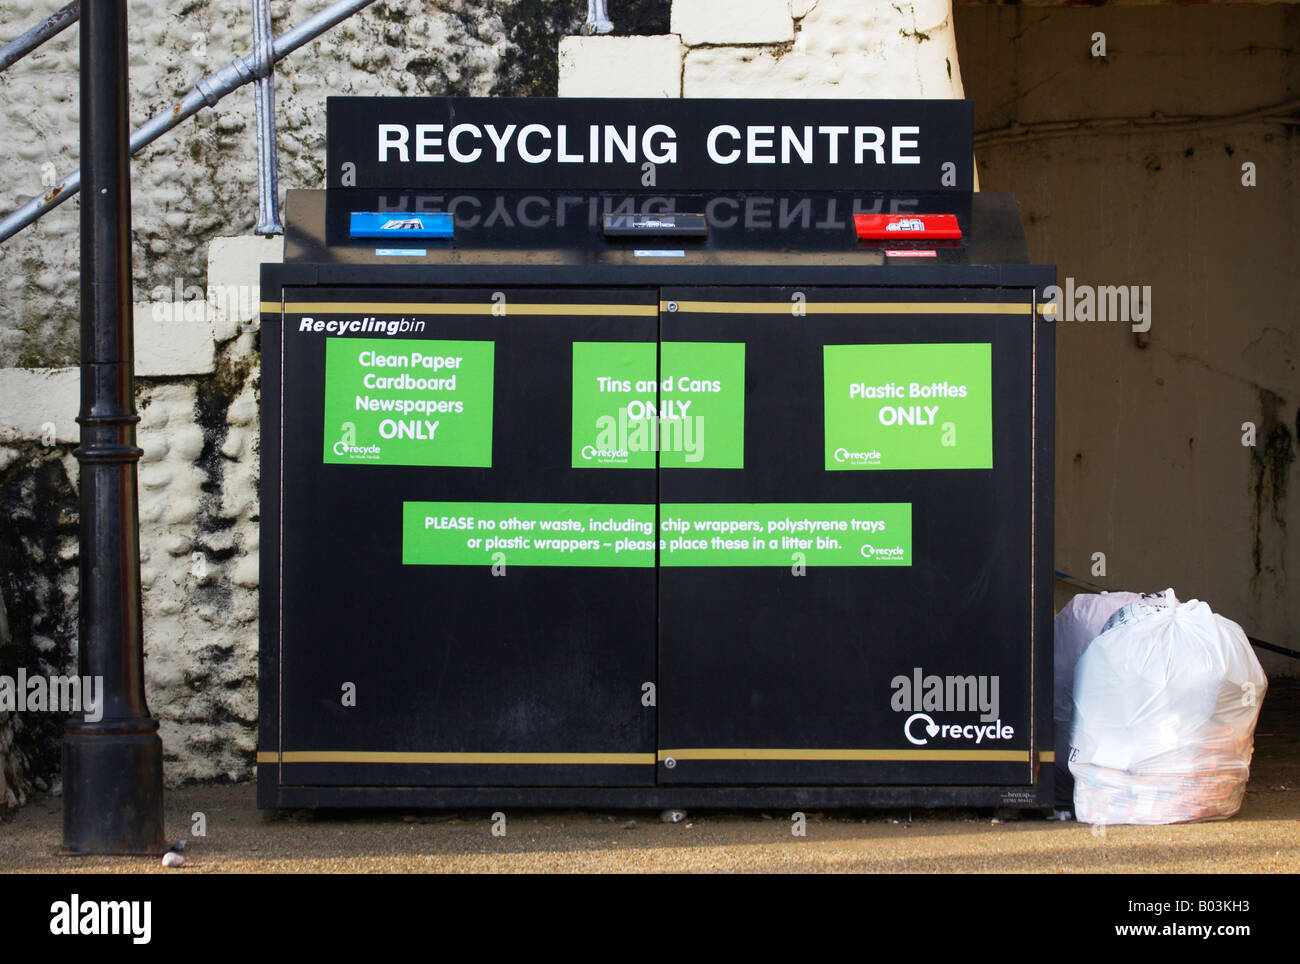 Public Recycling Centre Bank / Bin for plastic bottles, Tin Cans, Paper, cardboard & newspapers on the Norfolk Coast at Cromer Stock Photo